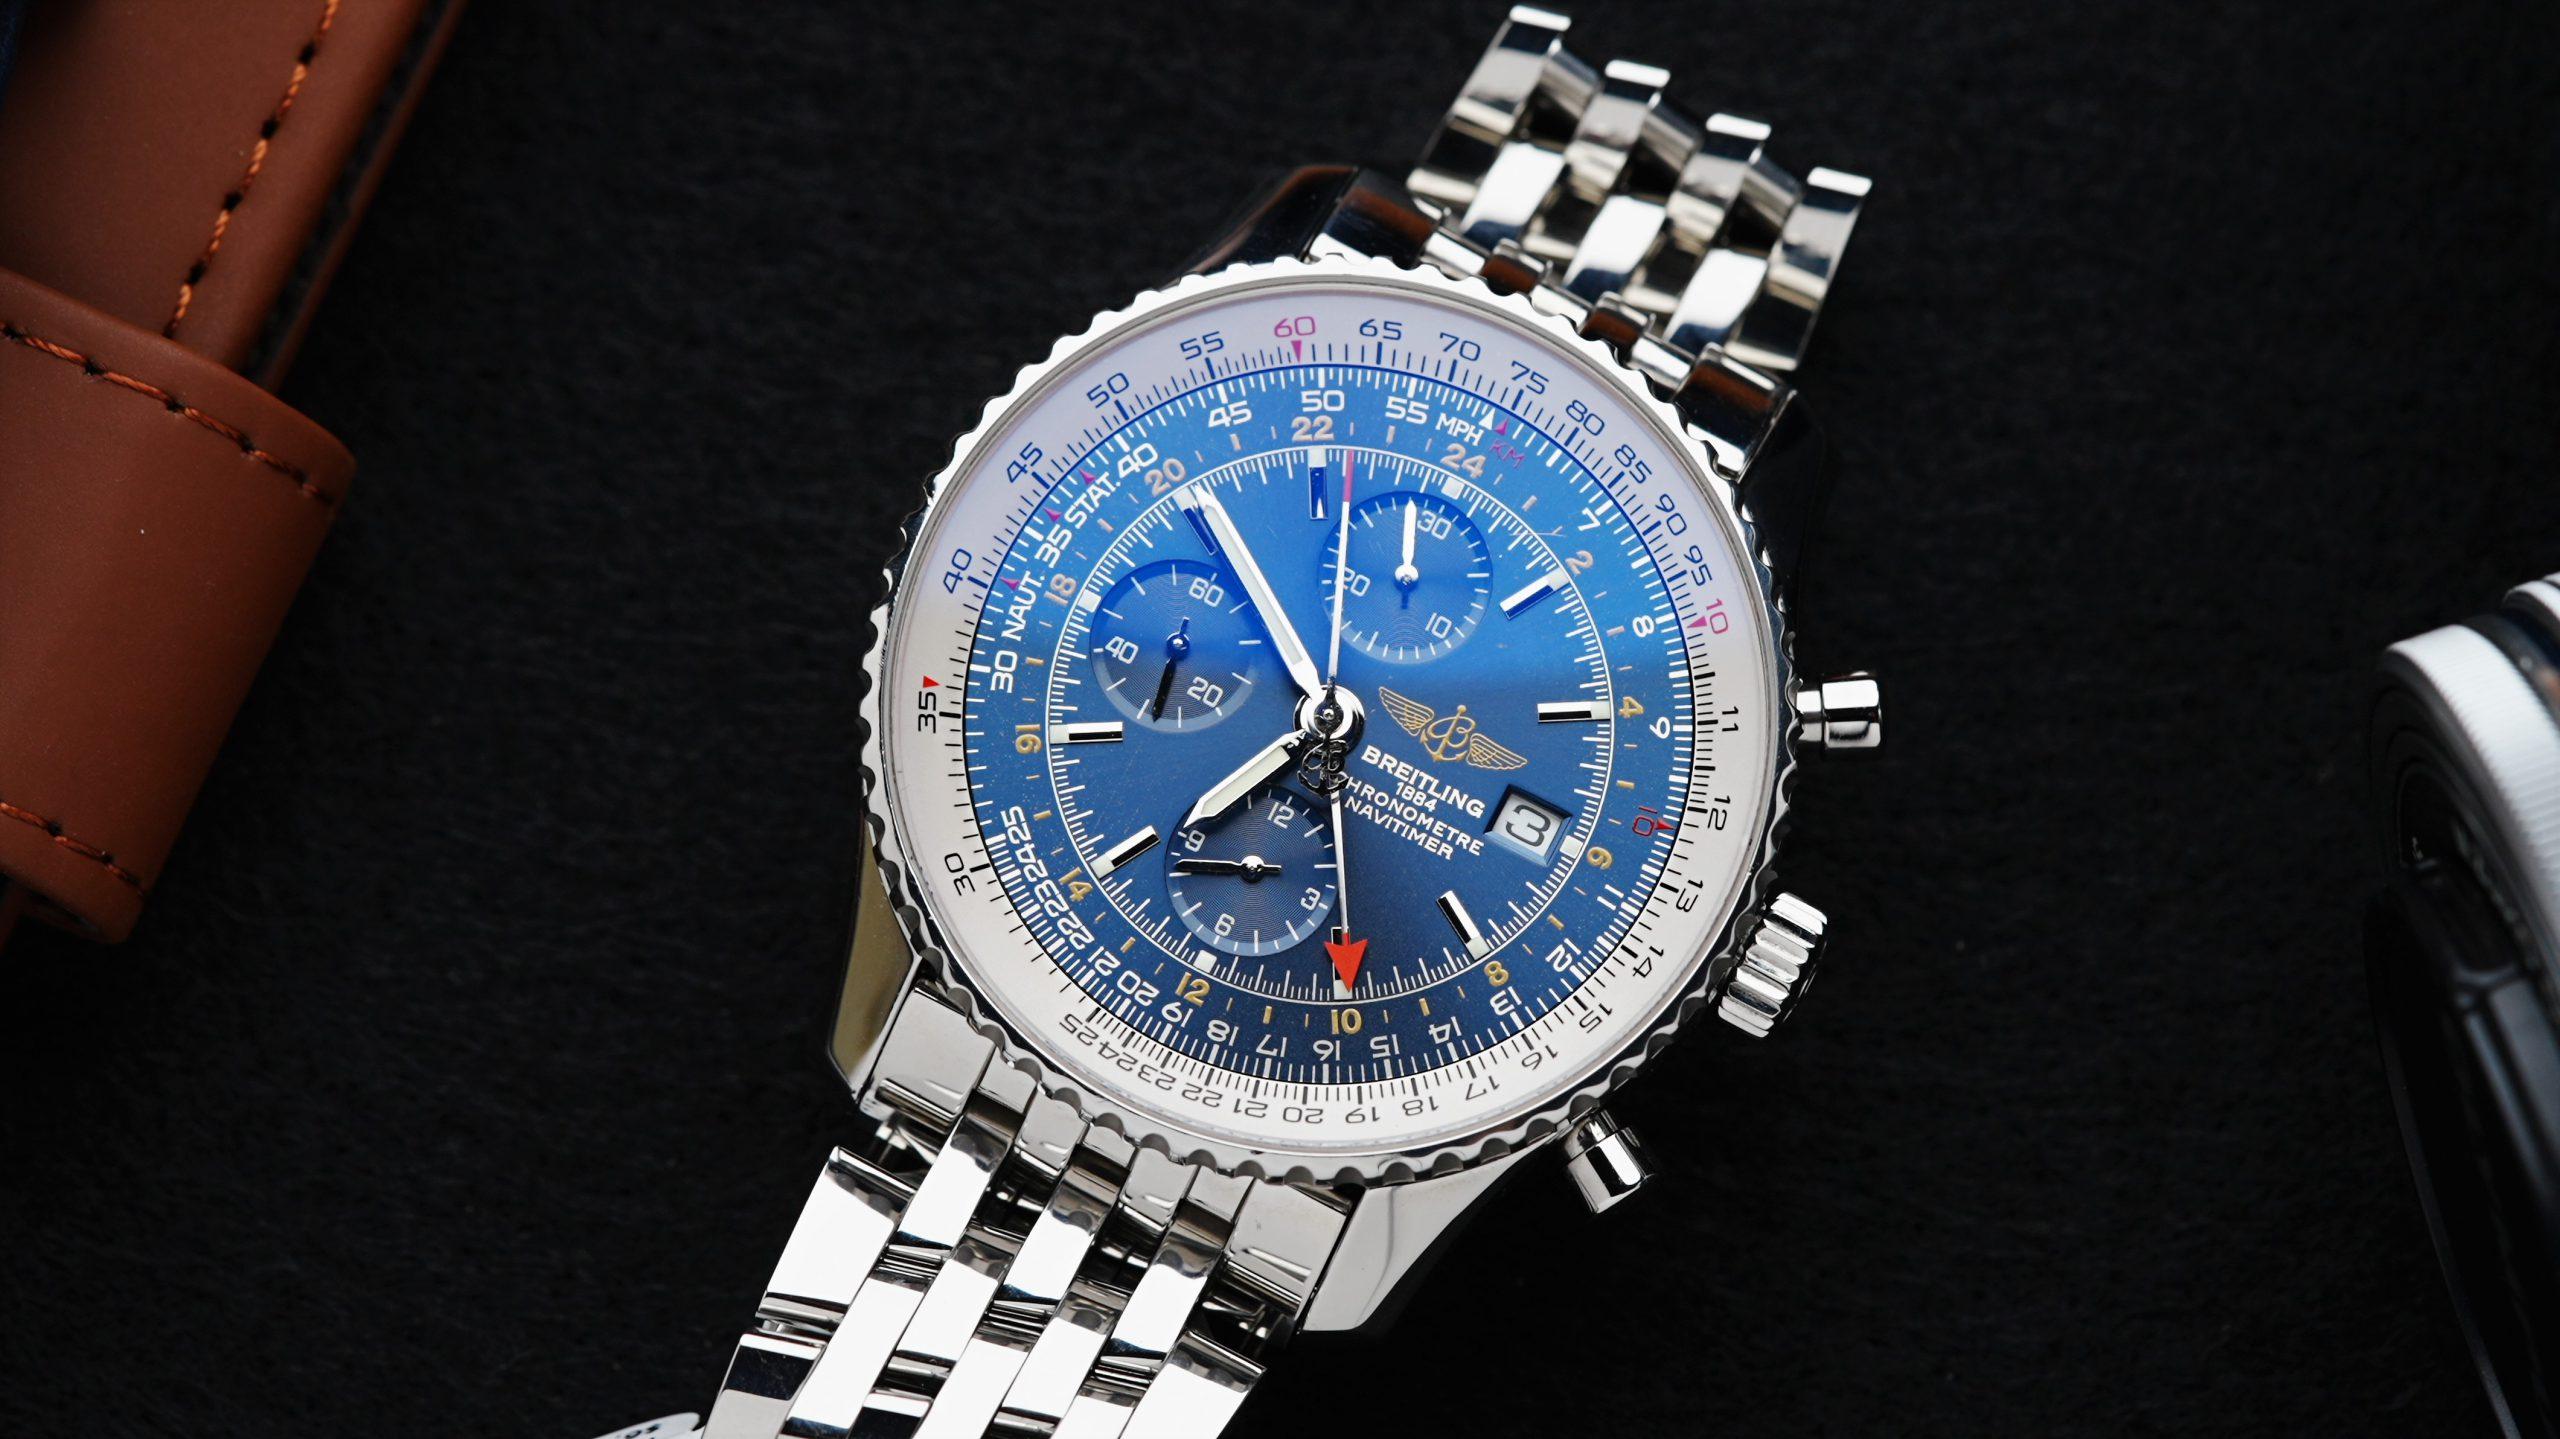 Breitling Navitimer 1 Chronograph Gmt 46 blue dial featured under white lighting on an angle.